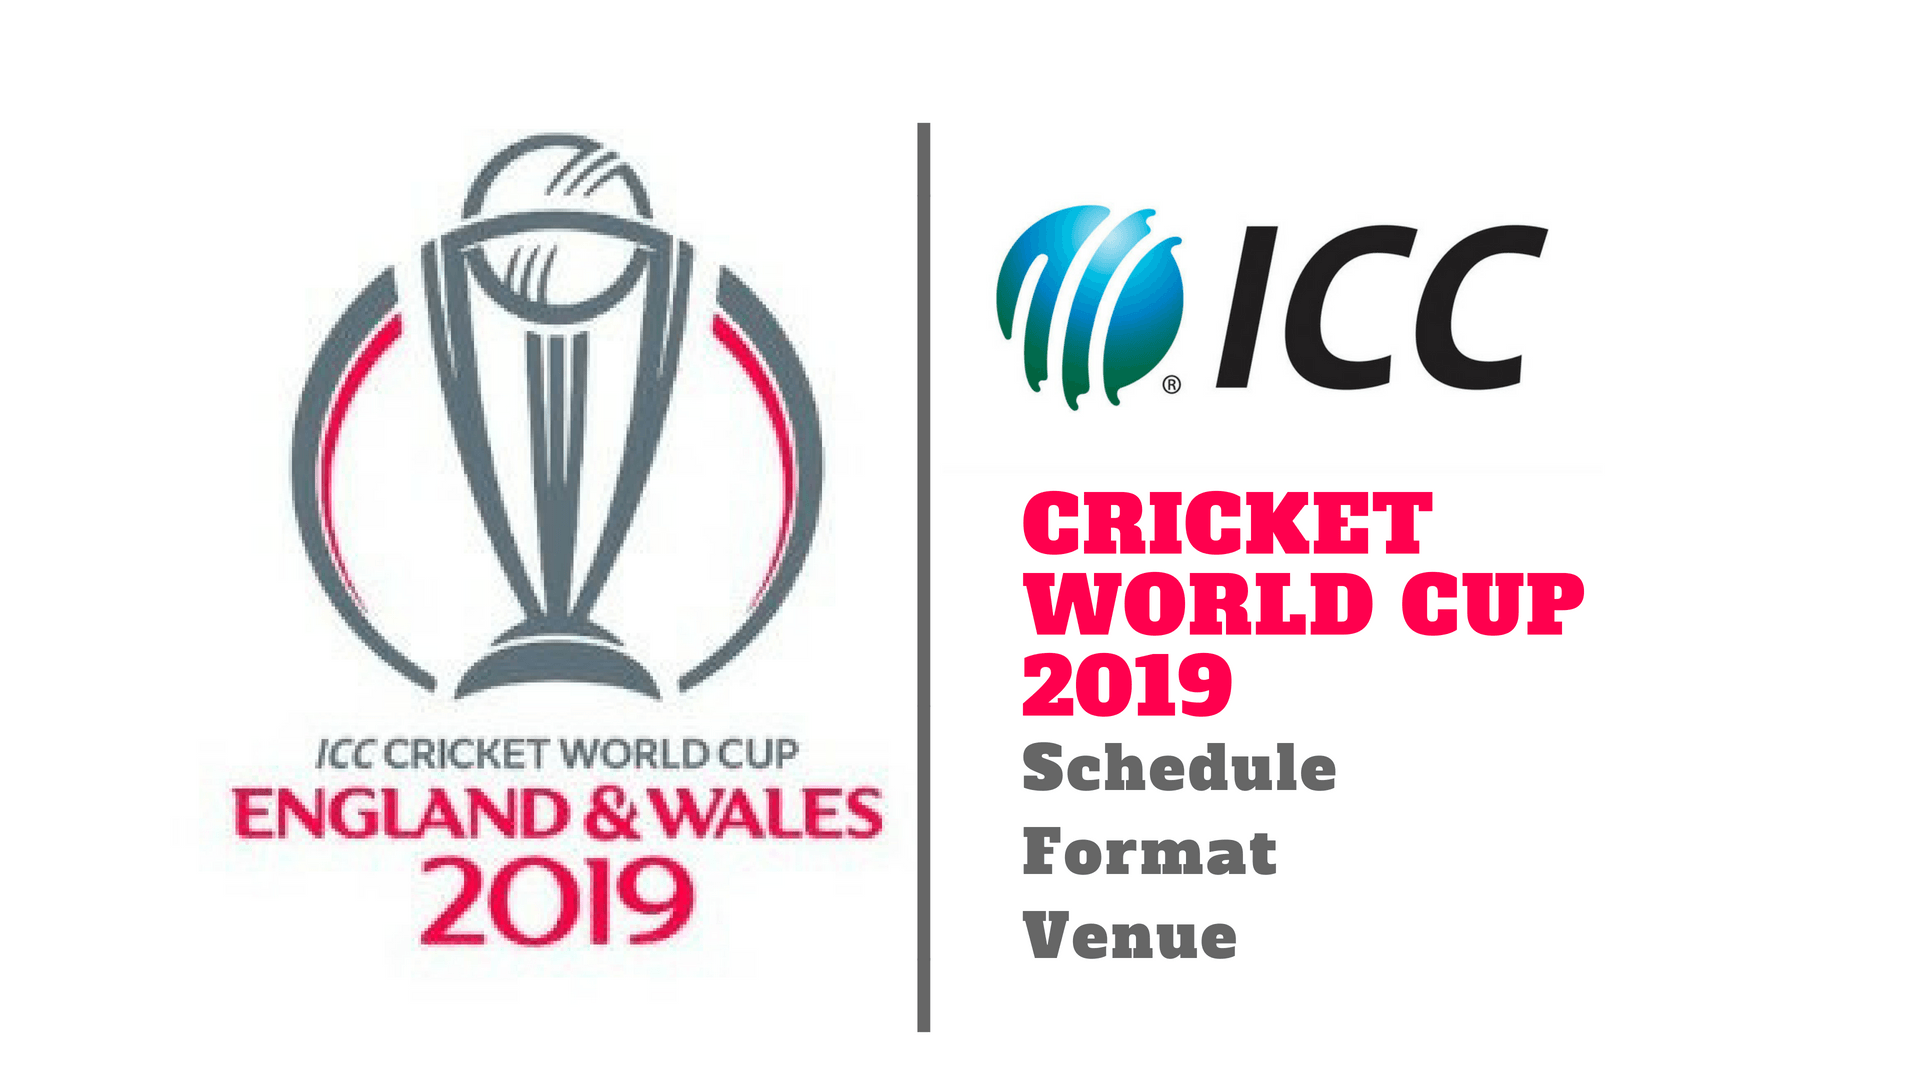 Cricket World Cup 2019 news: Where to watch live match online